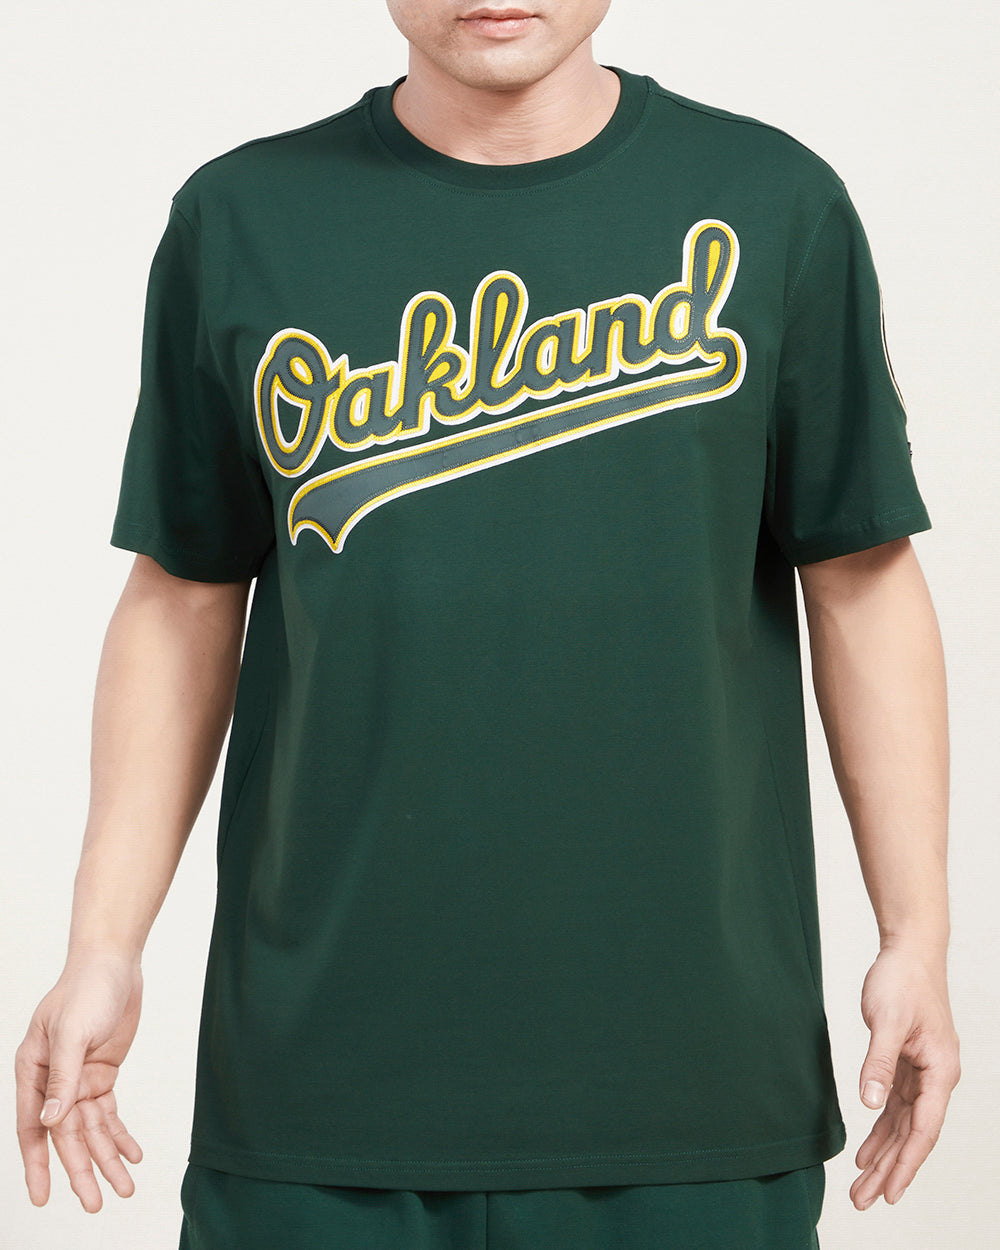 Youth Stitches Gray/Green Oakland Athletics Team Jersey